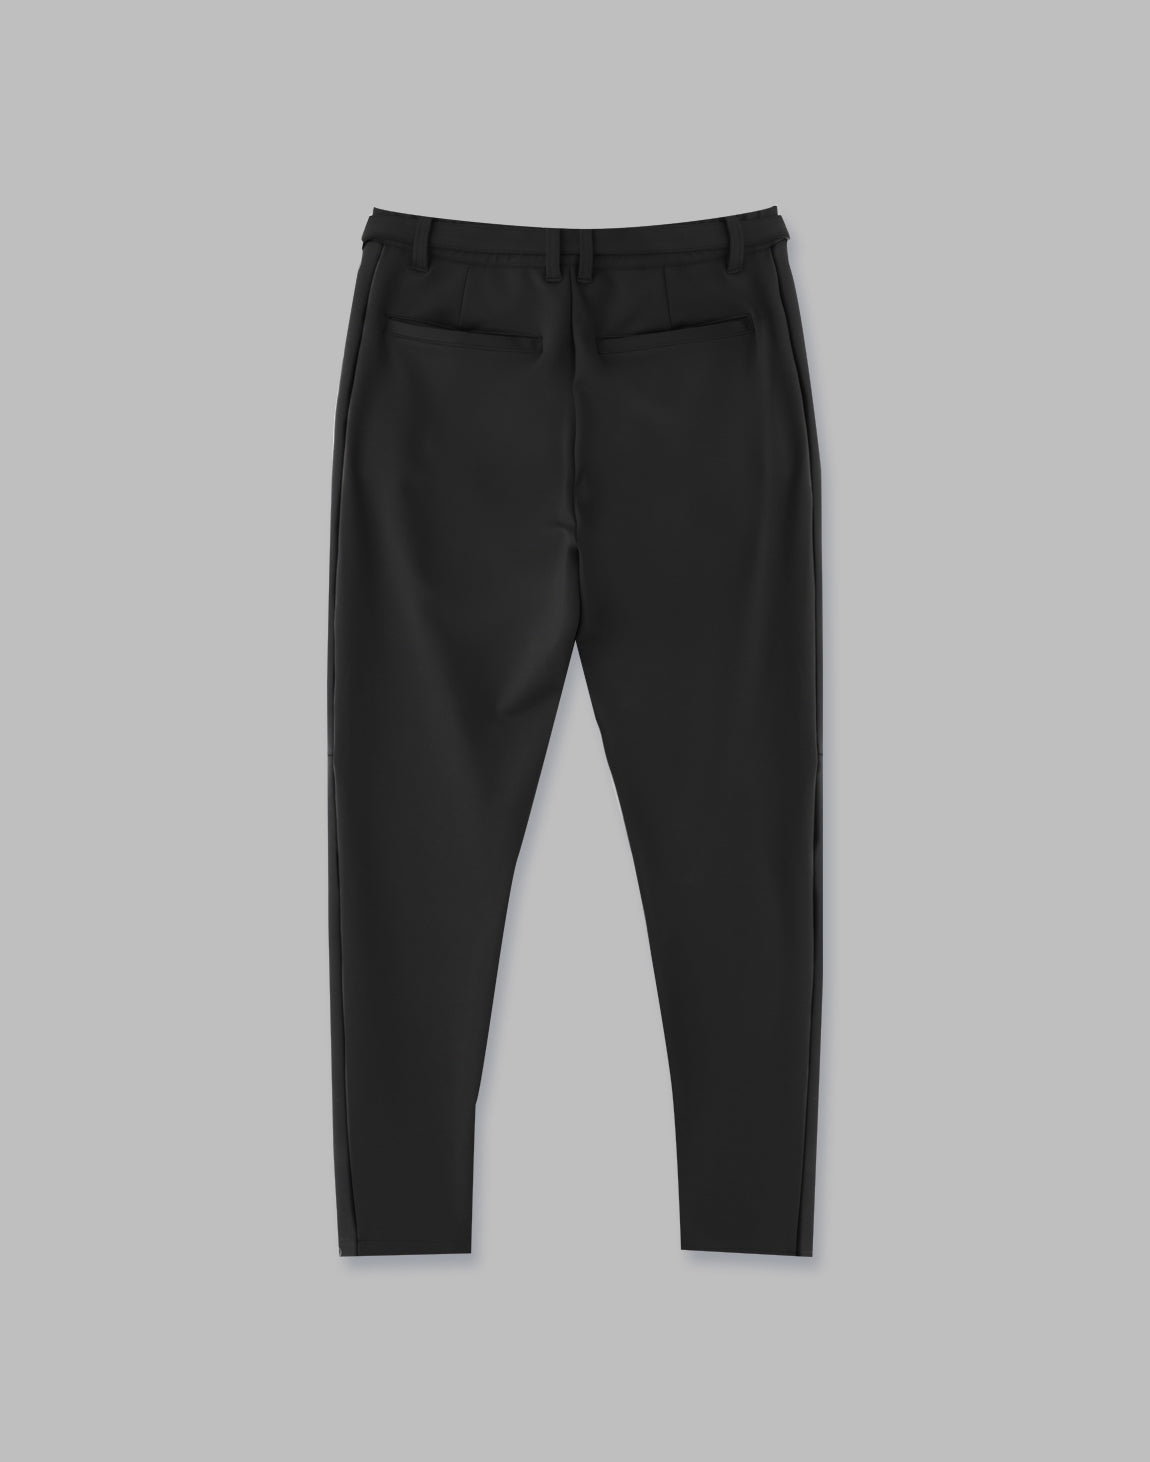 CRONOS BLACK STRETCH TAPERED PANTS – クロノス CRONOS Official Store